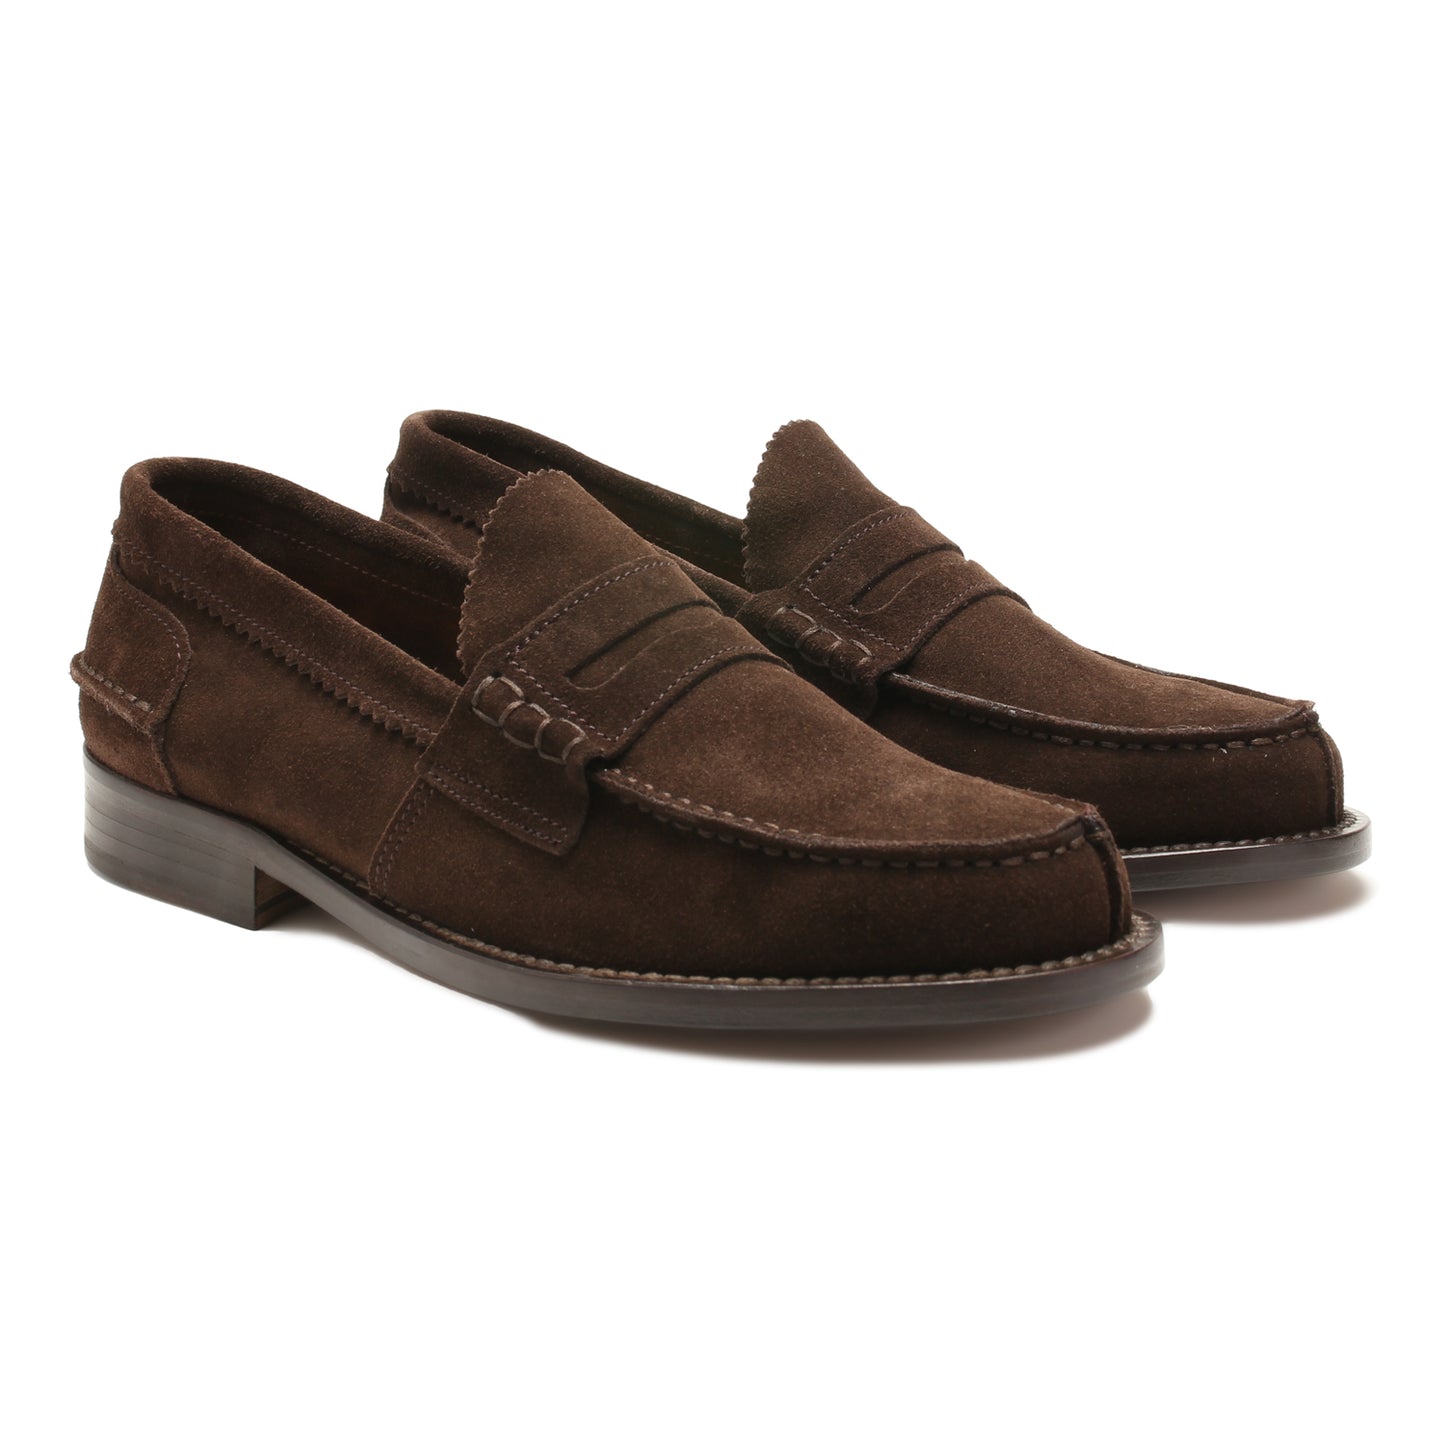 Elegant Mens Suede Leather Loafers